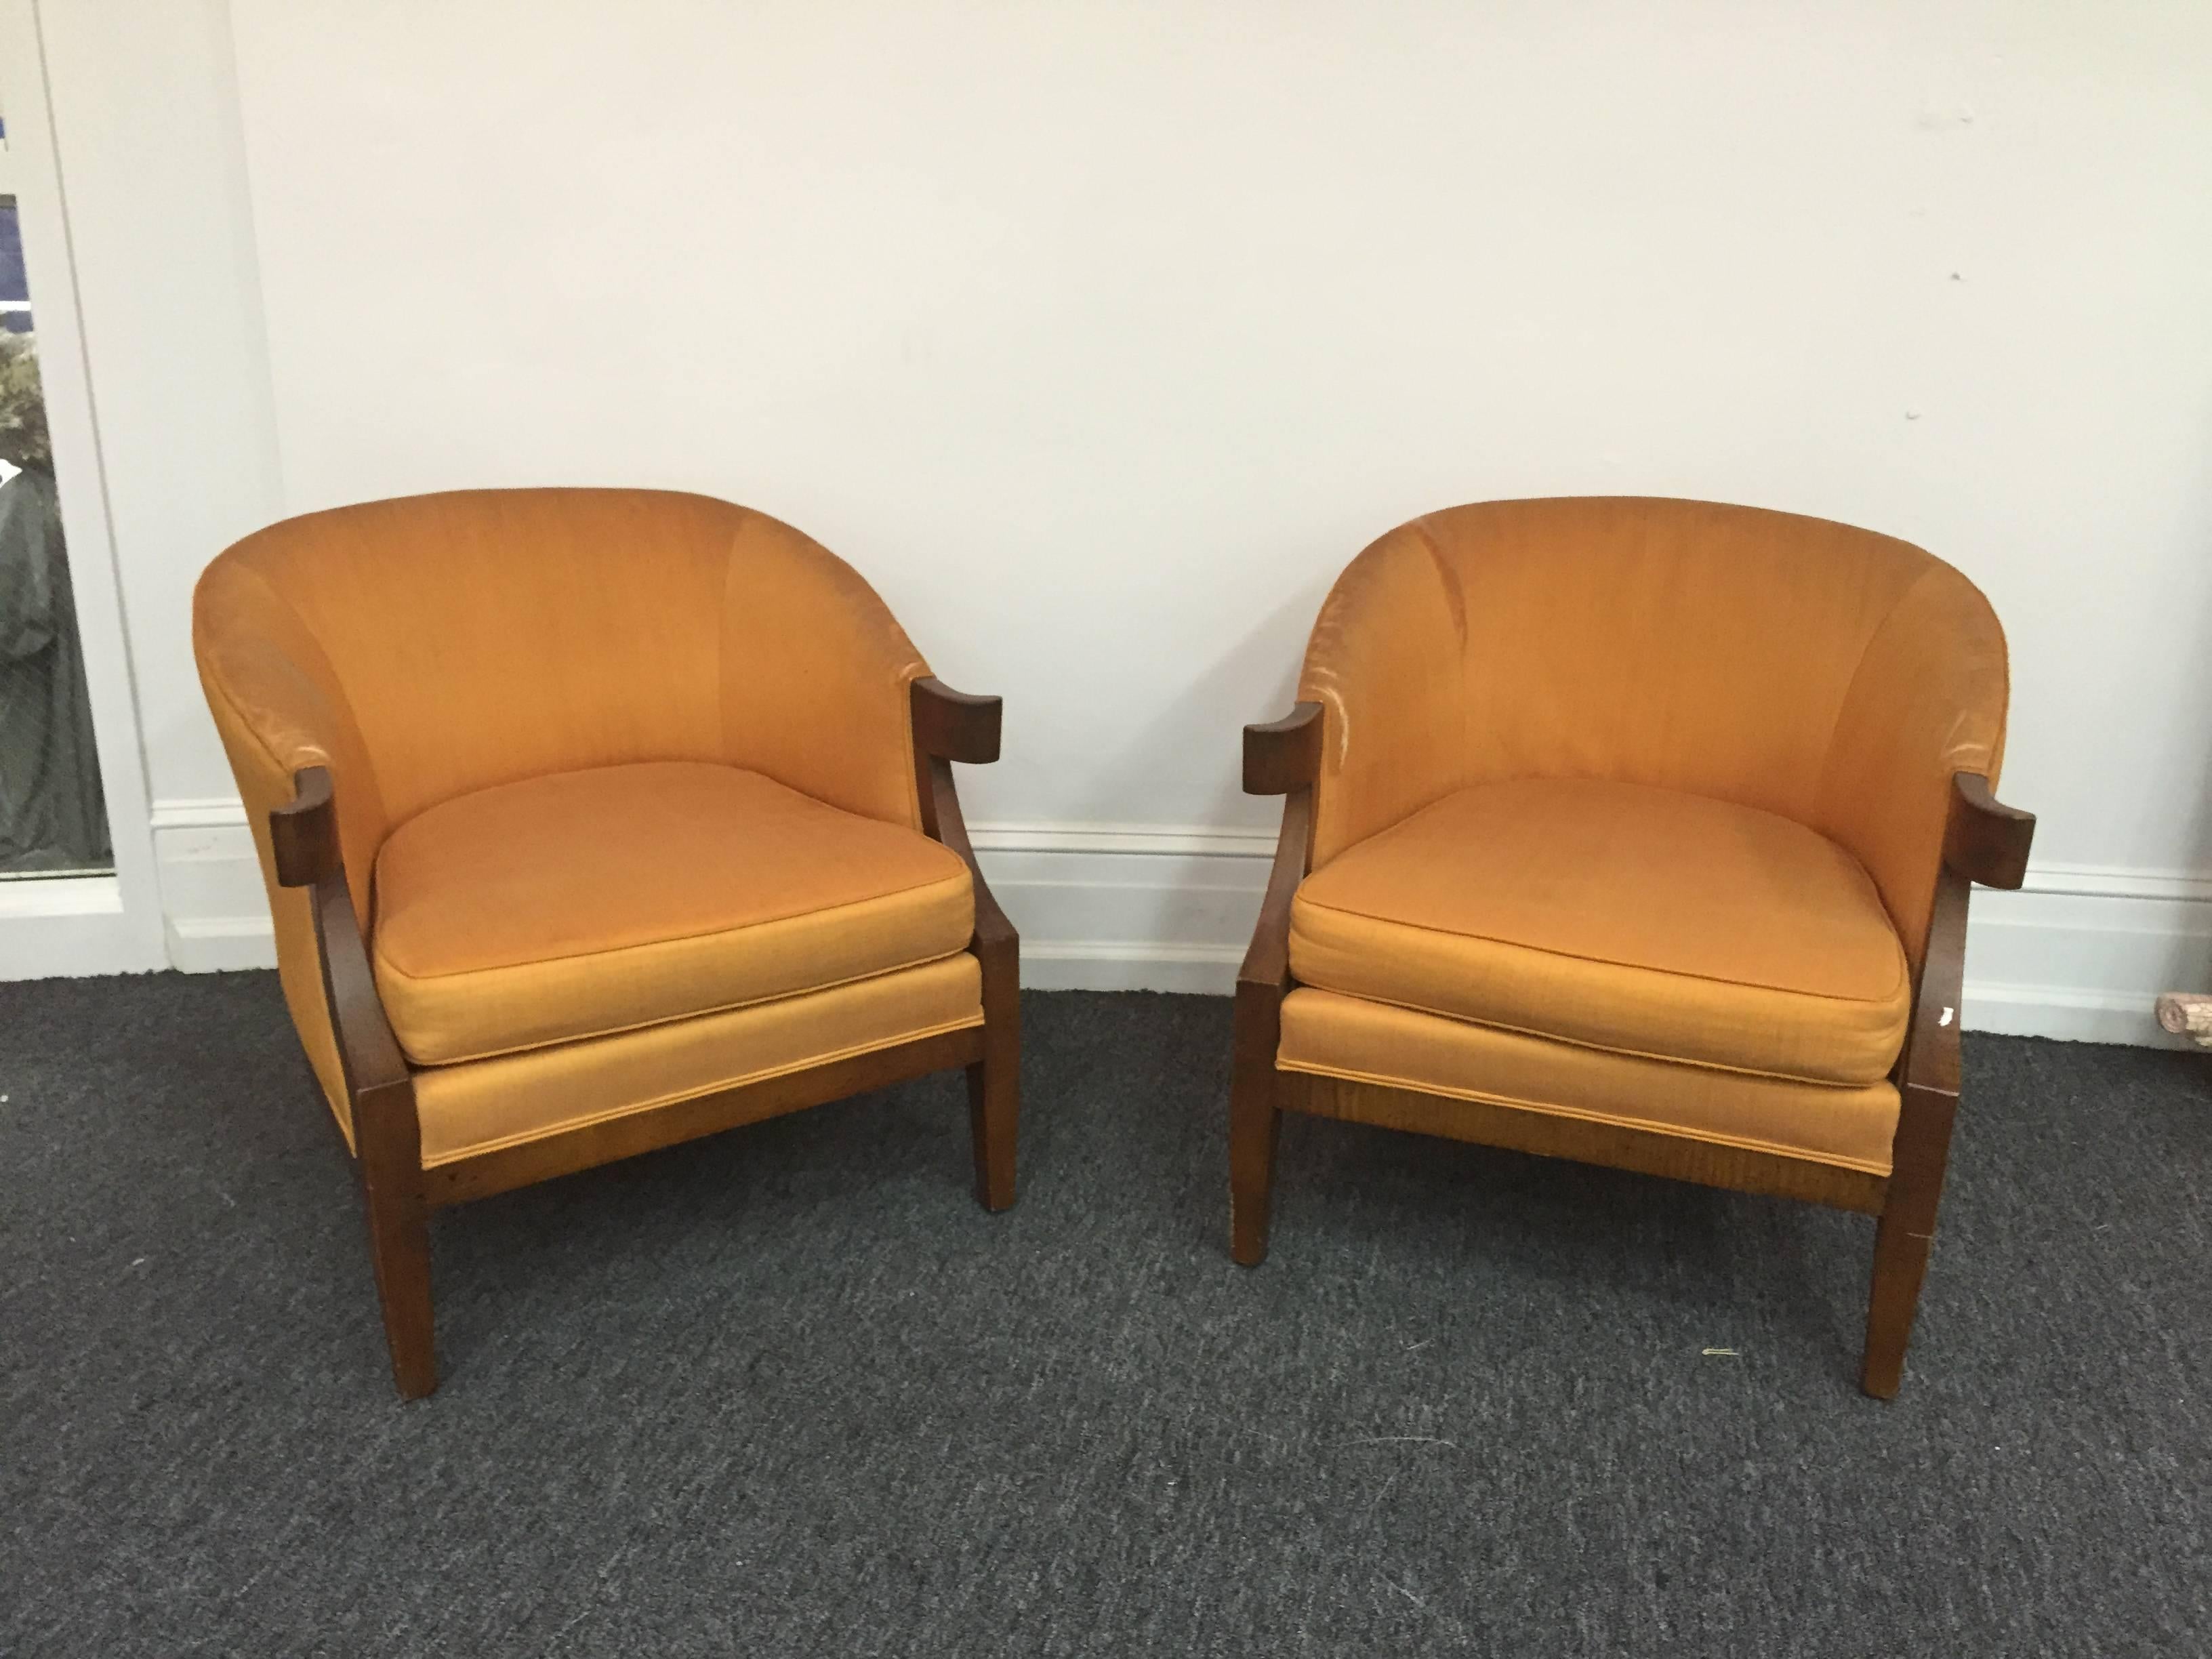 Pair of Art Deco Slipper Chairs in the Manner of Tommi Parzinger In Good Condition For Sale In Mount Penn, PA